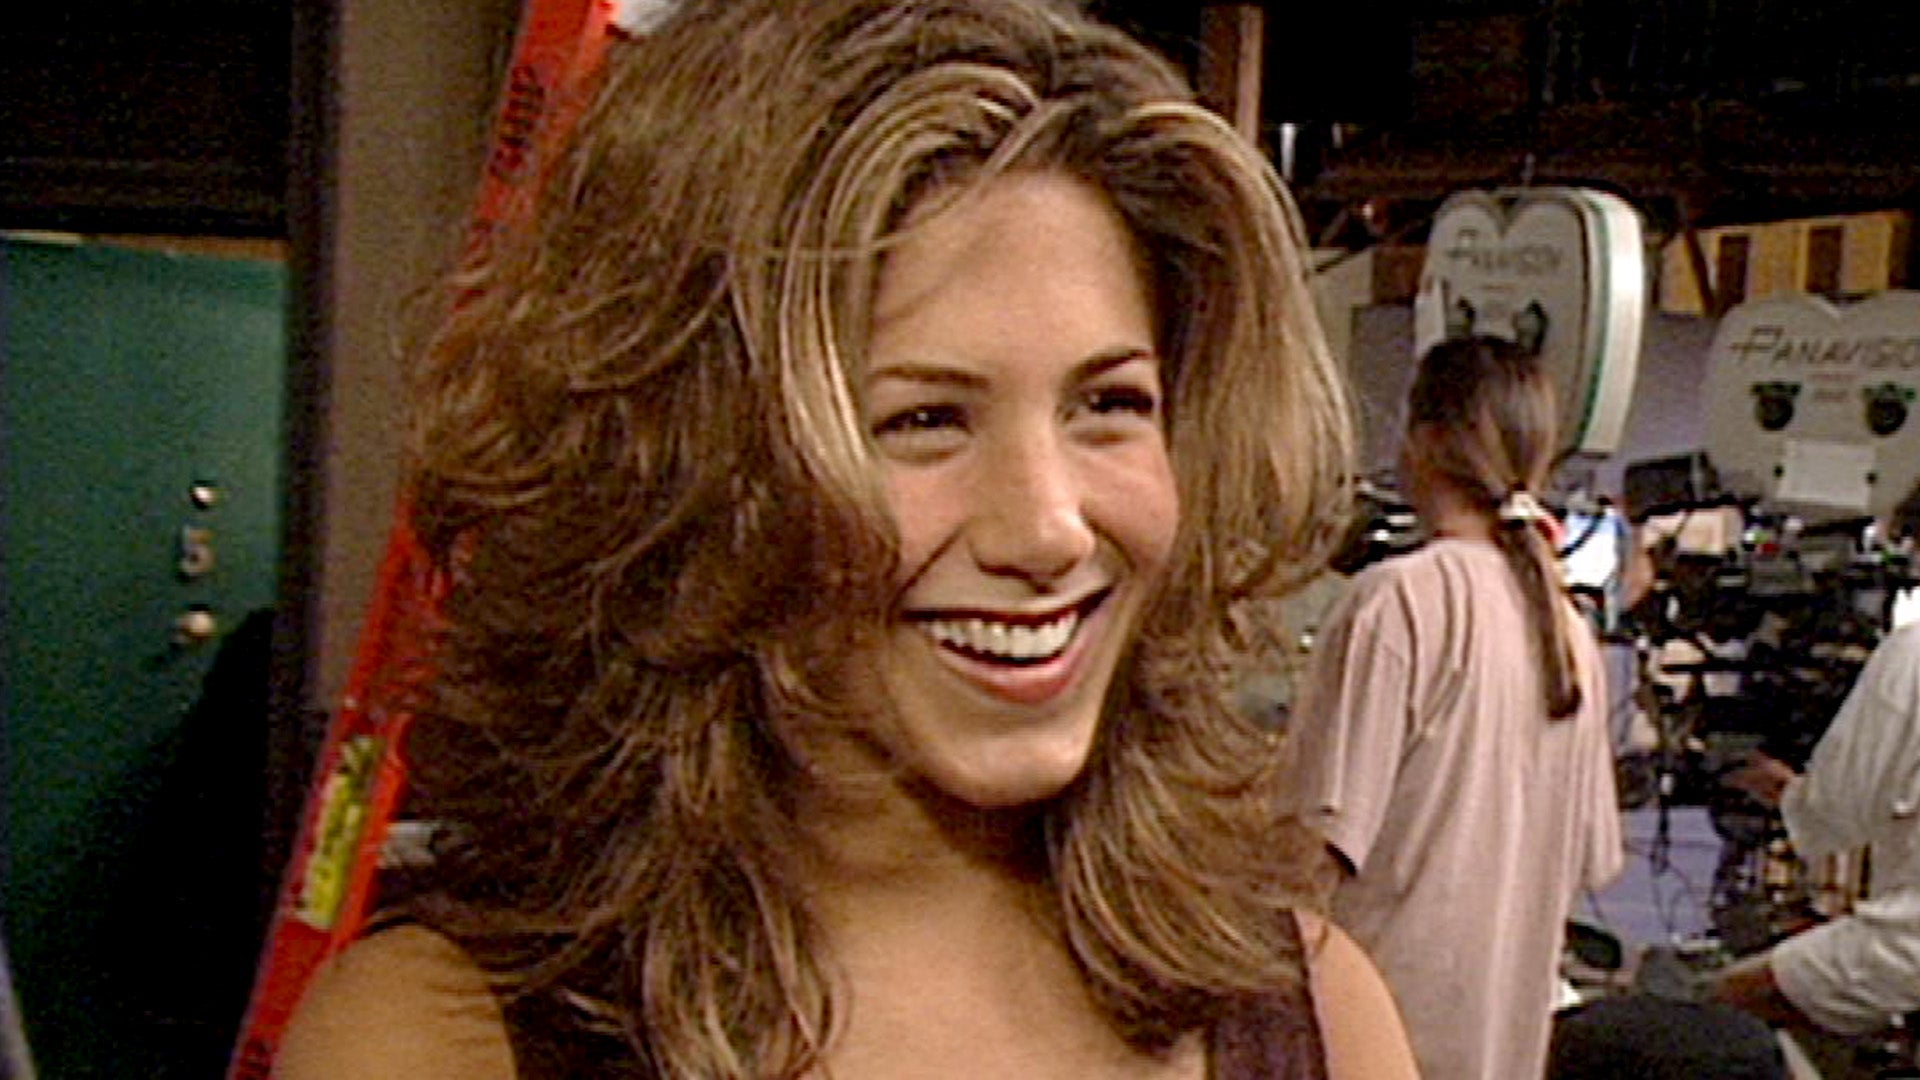 Jennifer Aniston's Hollywood Rise: See Rare Interviews From 'Friends' to Now